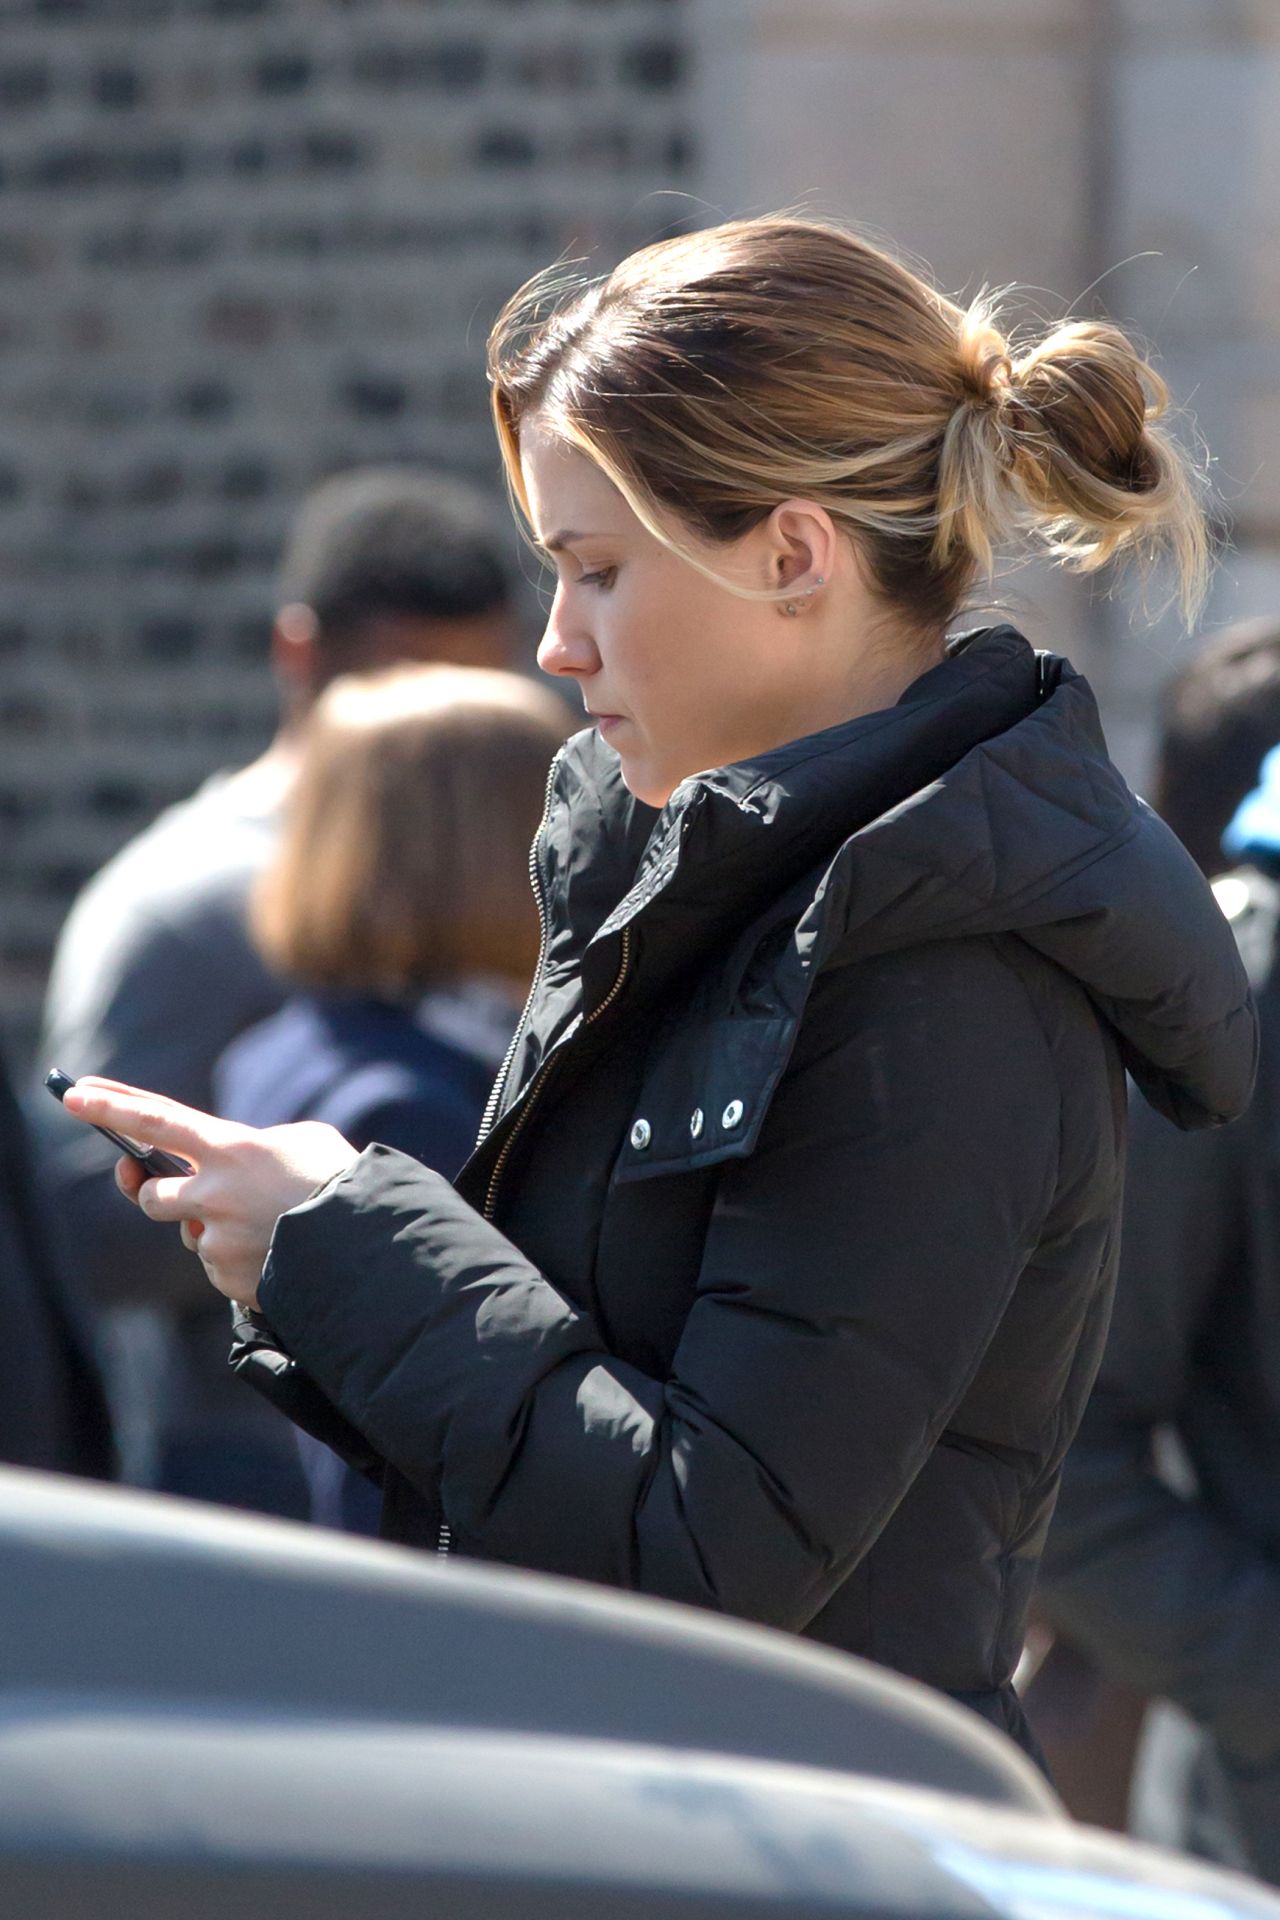 Sophia Bush On the Set of 'Chicago PD' in Chicago, April 20151280 x 1920